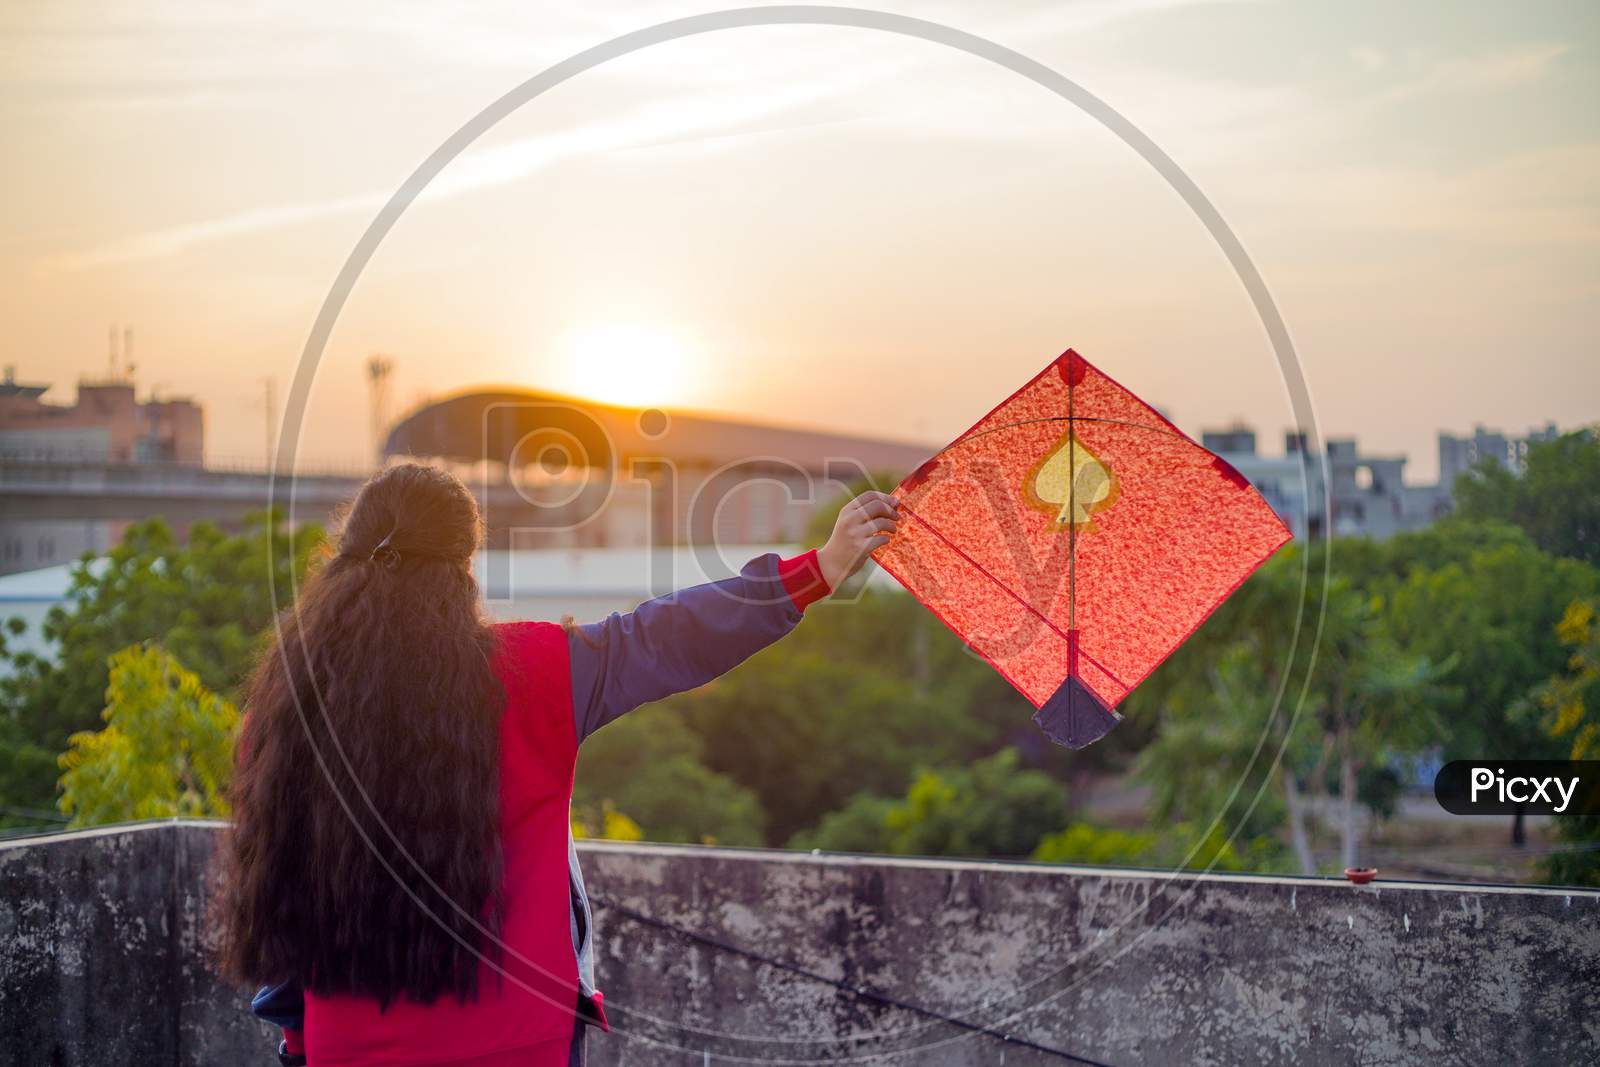 Young Woman Holding Aloft Colorful Paper And Wood Kite Against A Blurred Background Setting Sun On The Indian Kite Festival Of Makar Sankranti Or Uttarayana